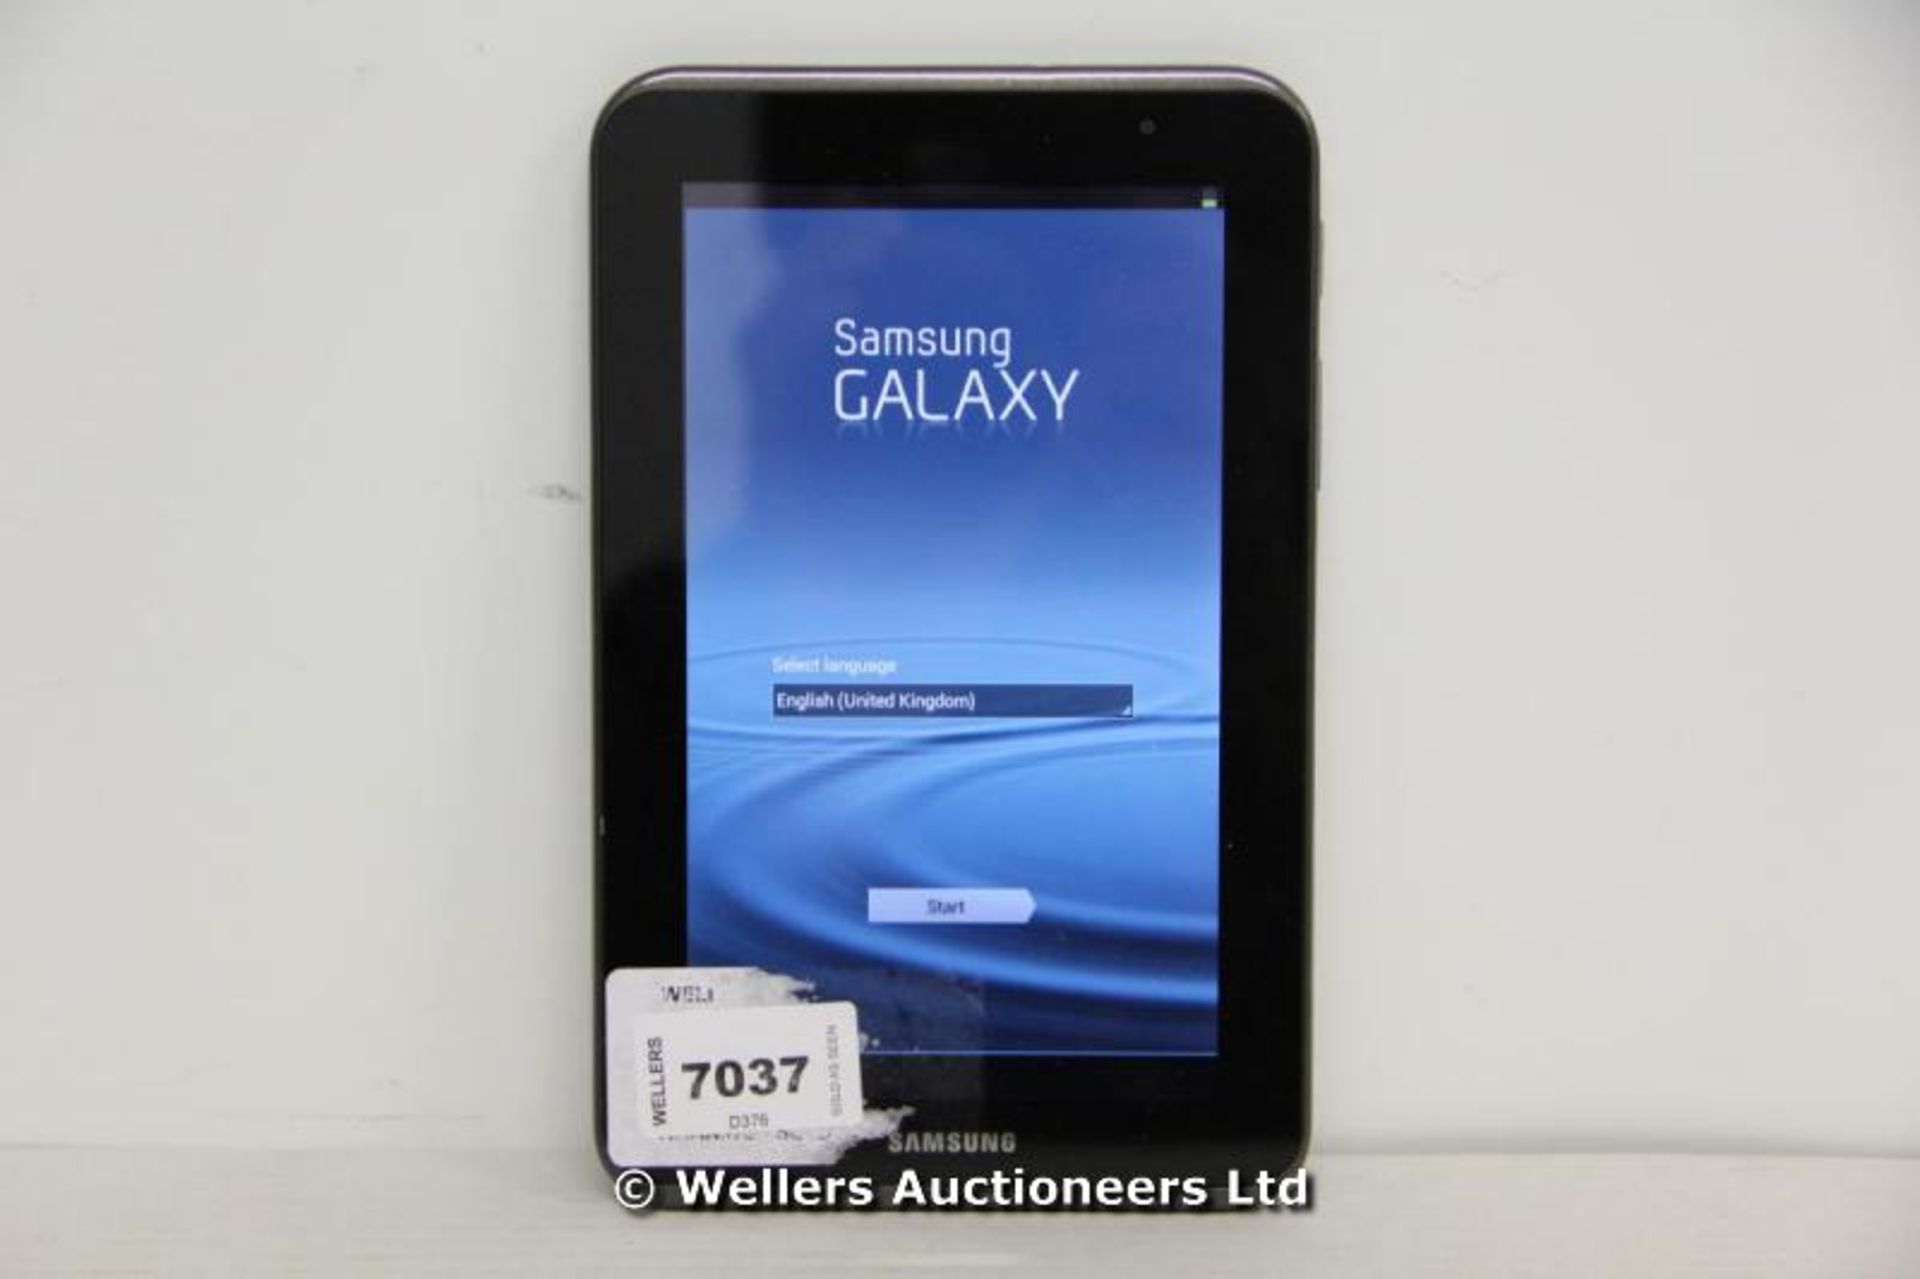 *"SAMSUNG TAB 2 7" BLACK / 1GHZ PROCESSOR / RAM 1GB / 8GB HDD / ANDROID O/S / WITH BATTERY / WITHOUT